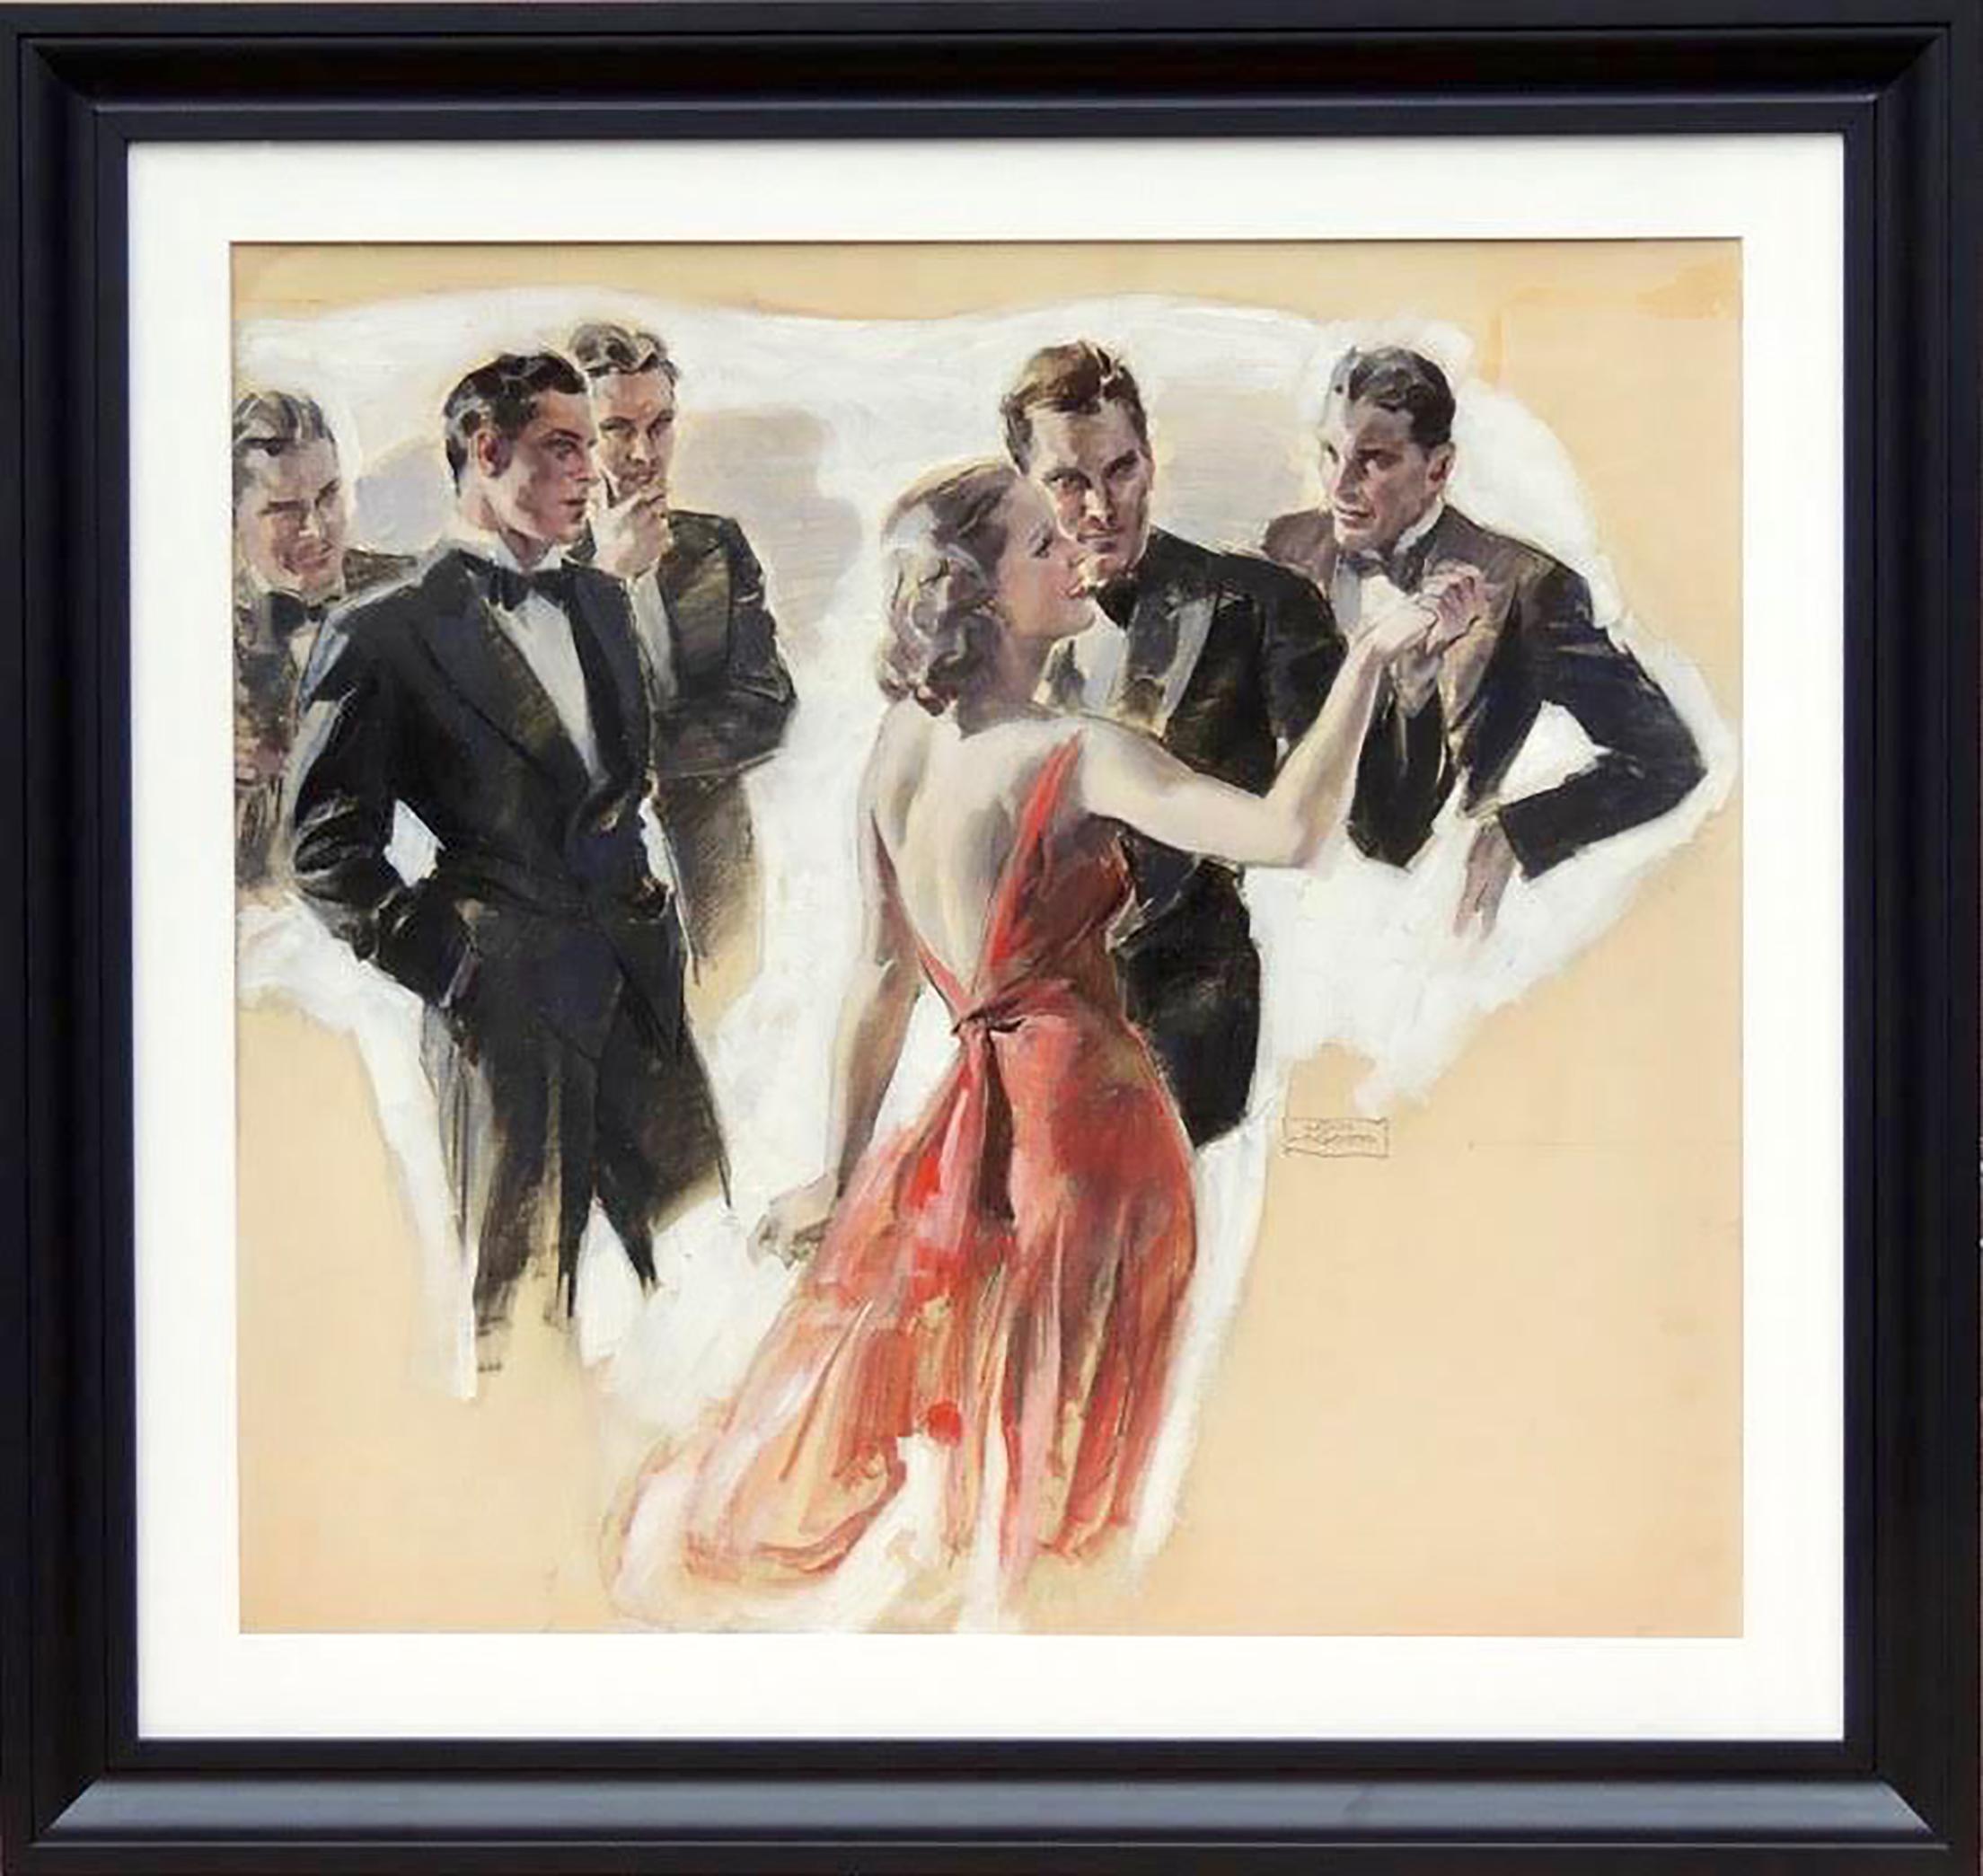 A Woman in Red Dress Dancing Among a Number of Tuxedoed Men - Art by John Lagatta